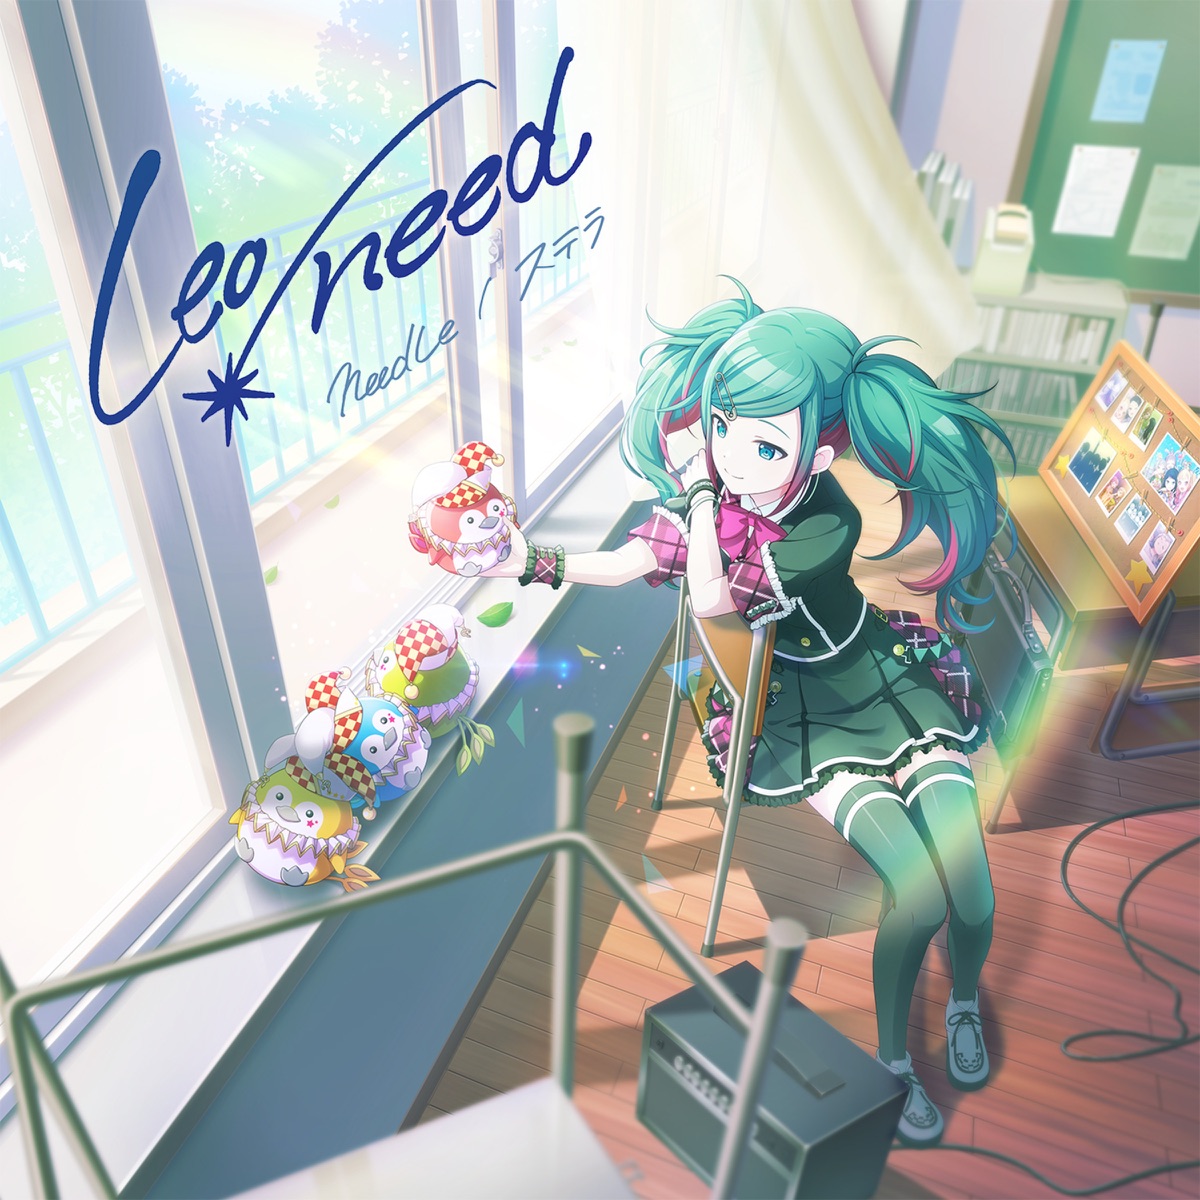 Cover for『Leo/need - needLe』from the release『needLe / Stella』